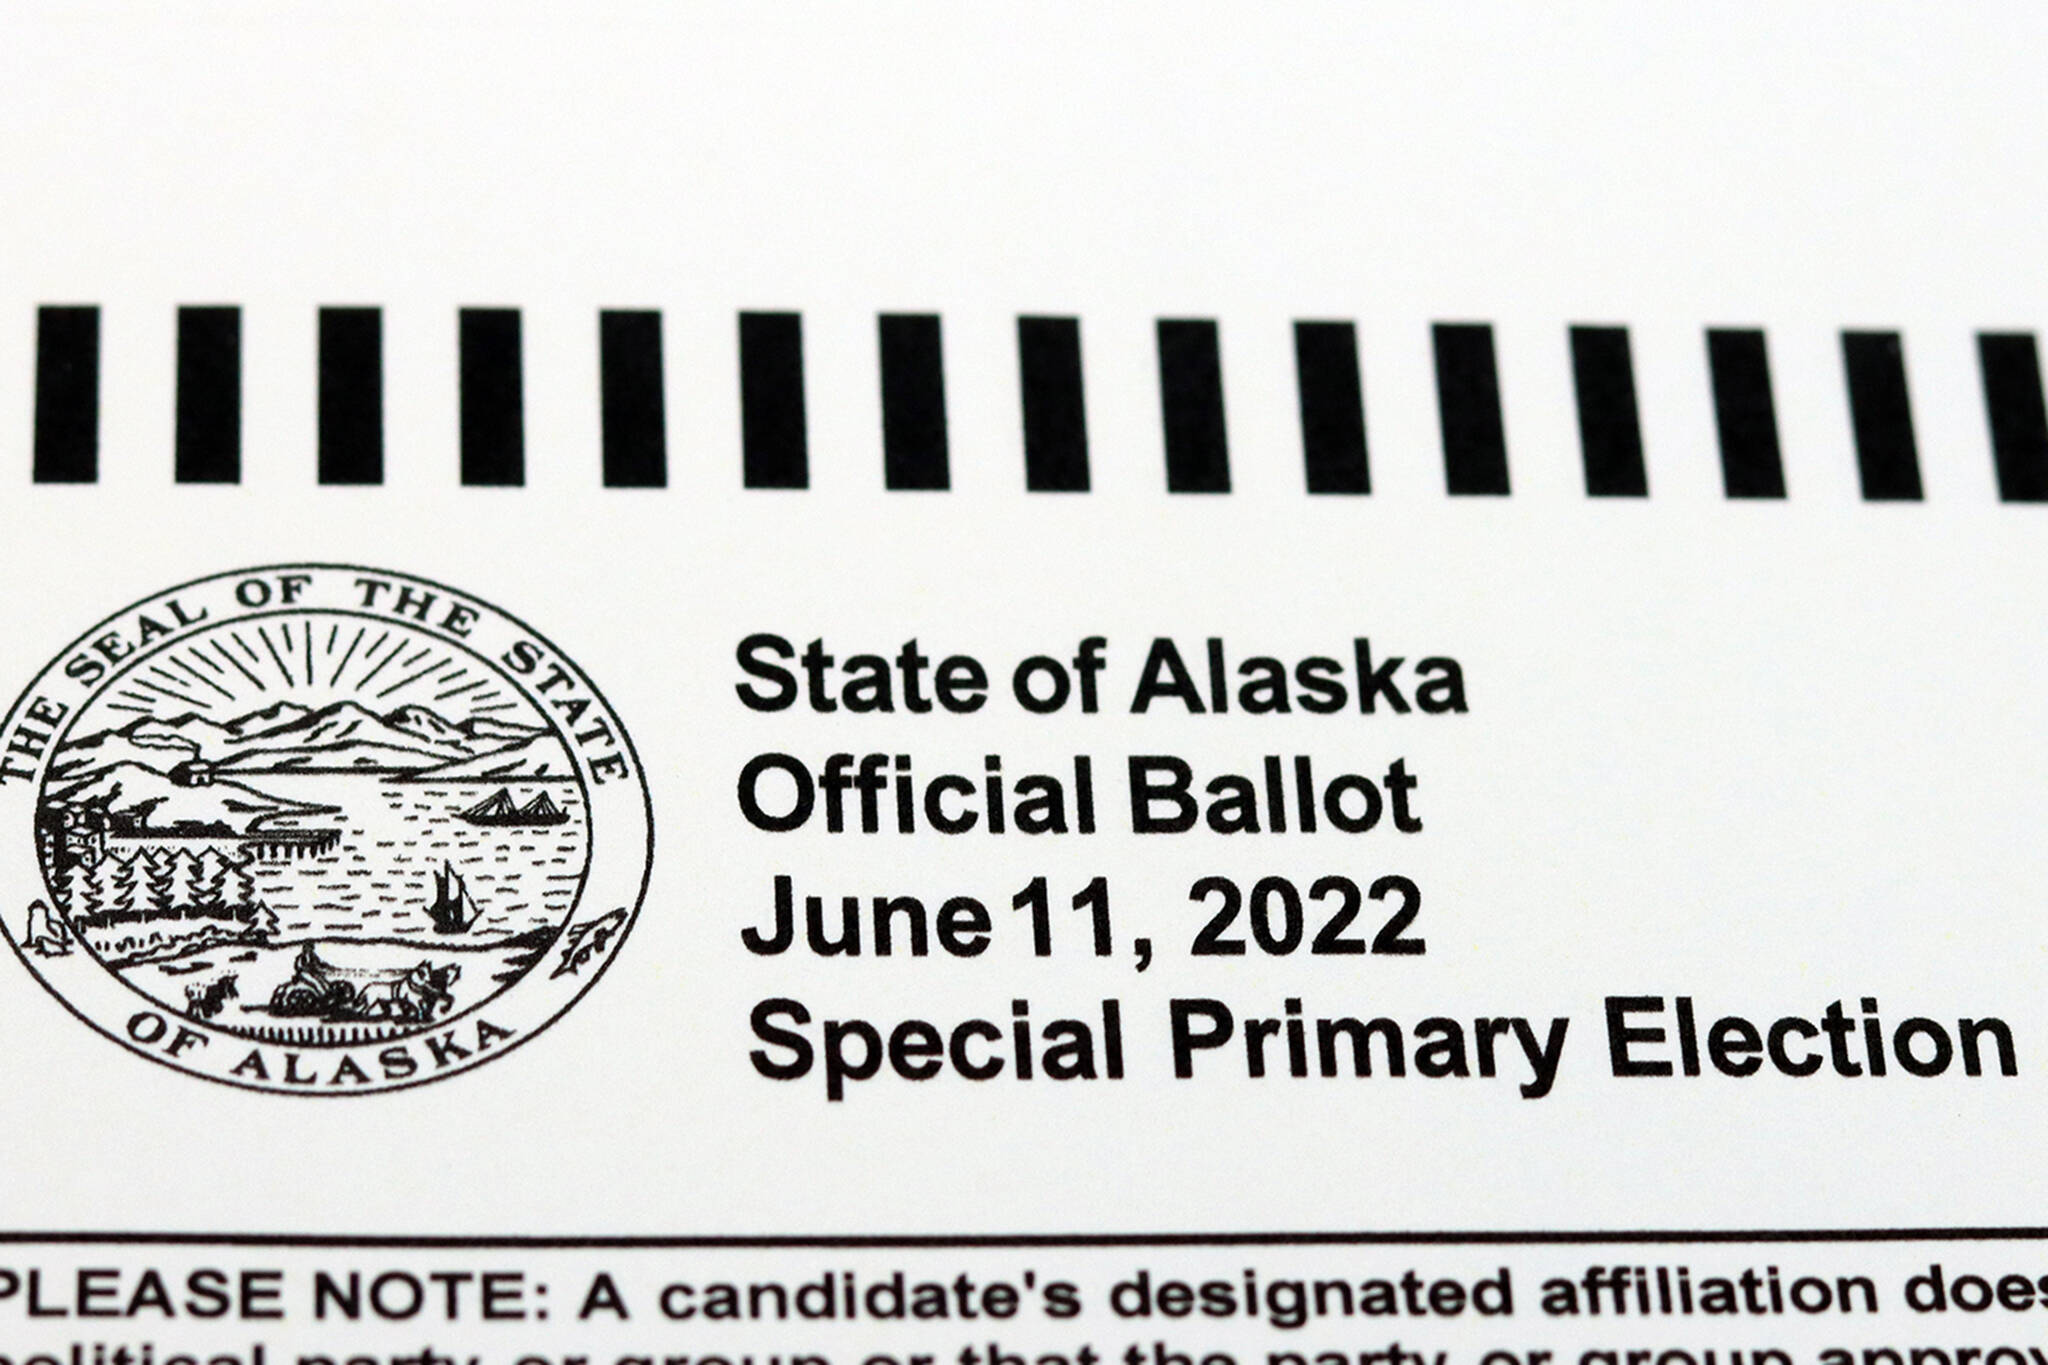 The top four candidates from the special primary election which ended June 11, 2022 are starting to take shape as additional results are released by the Alaska Division of Elections. (Ben Hohenstatt / Juneau Empire)